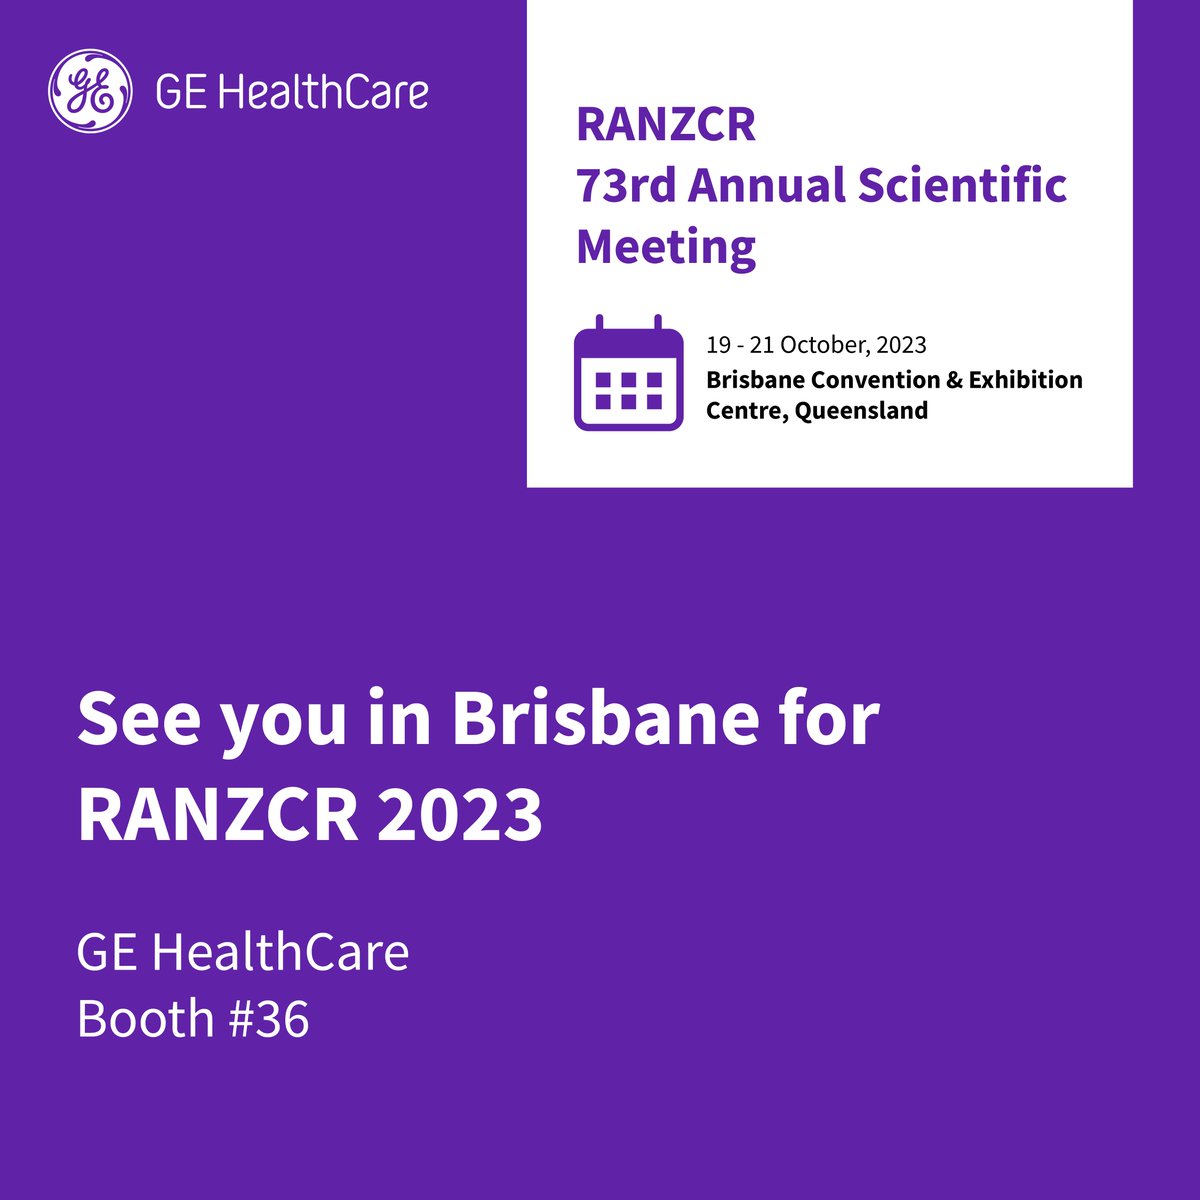 🌟 Join us at RANZCR 2023! 🌟 @GEHealthCare is committed to tackling cost reduction, patient satisfaction, radiology burnout, and future readiness with intelligent solutions. Let's connect at the conference. #GEHealthCare #RANZCR2023